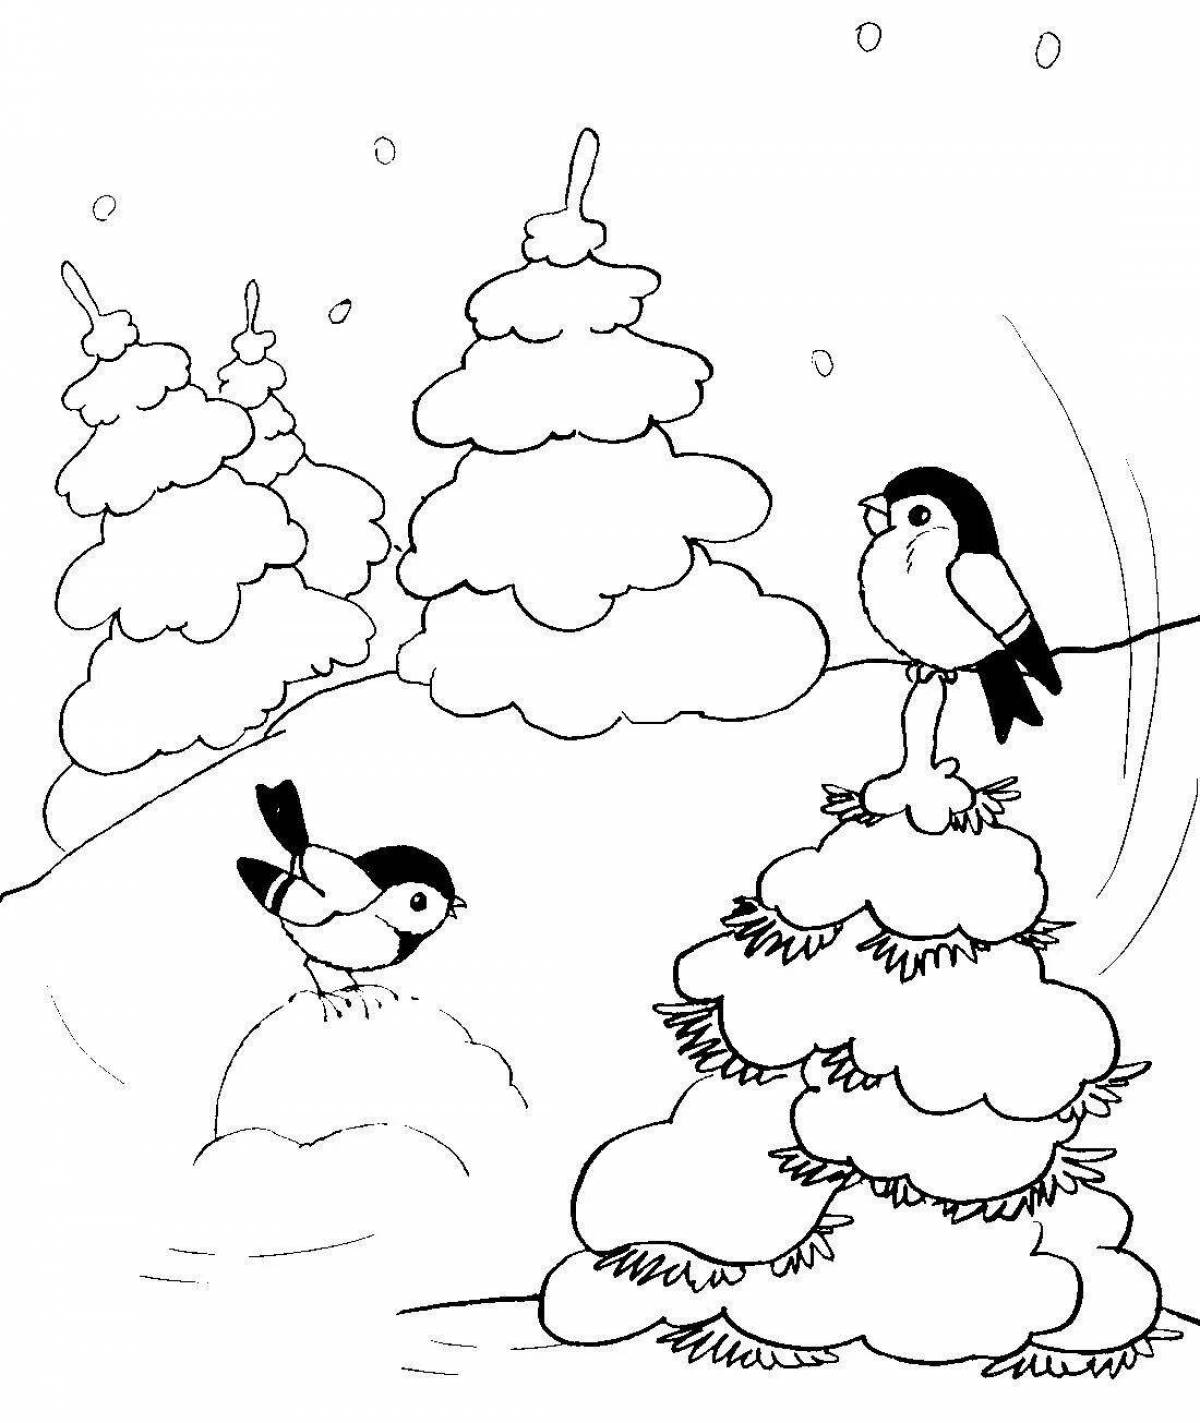 Live winter tree coloring page